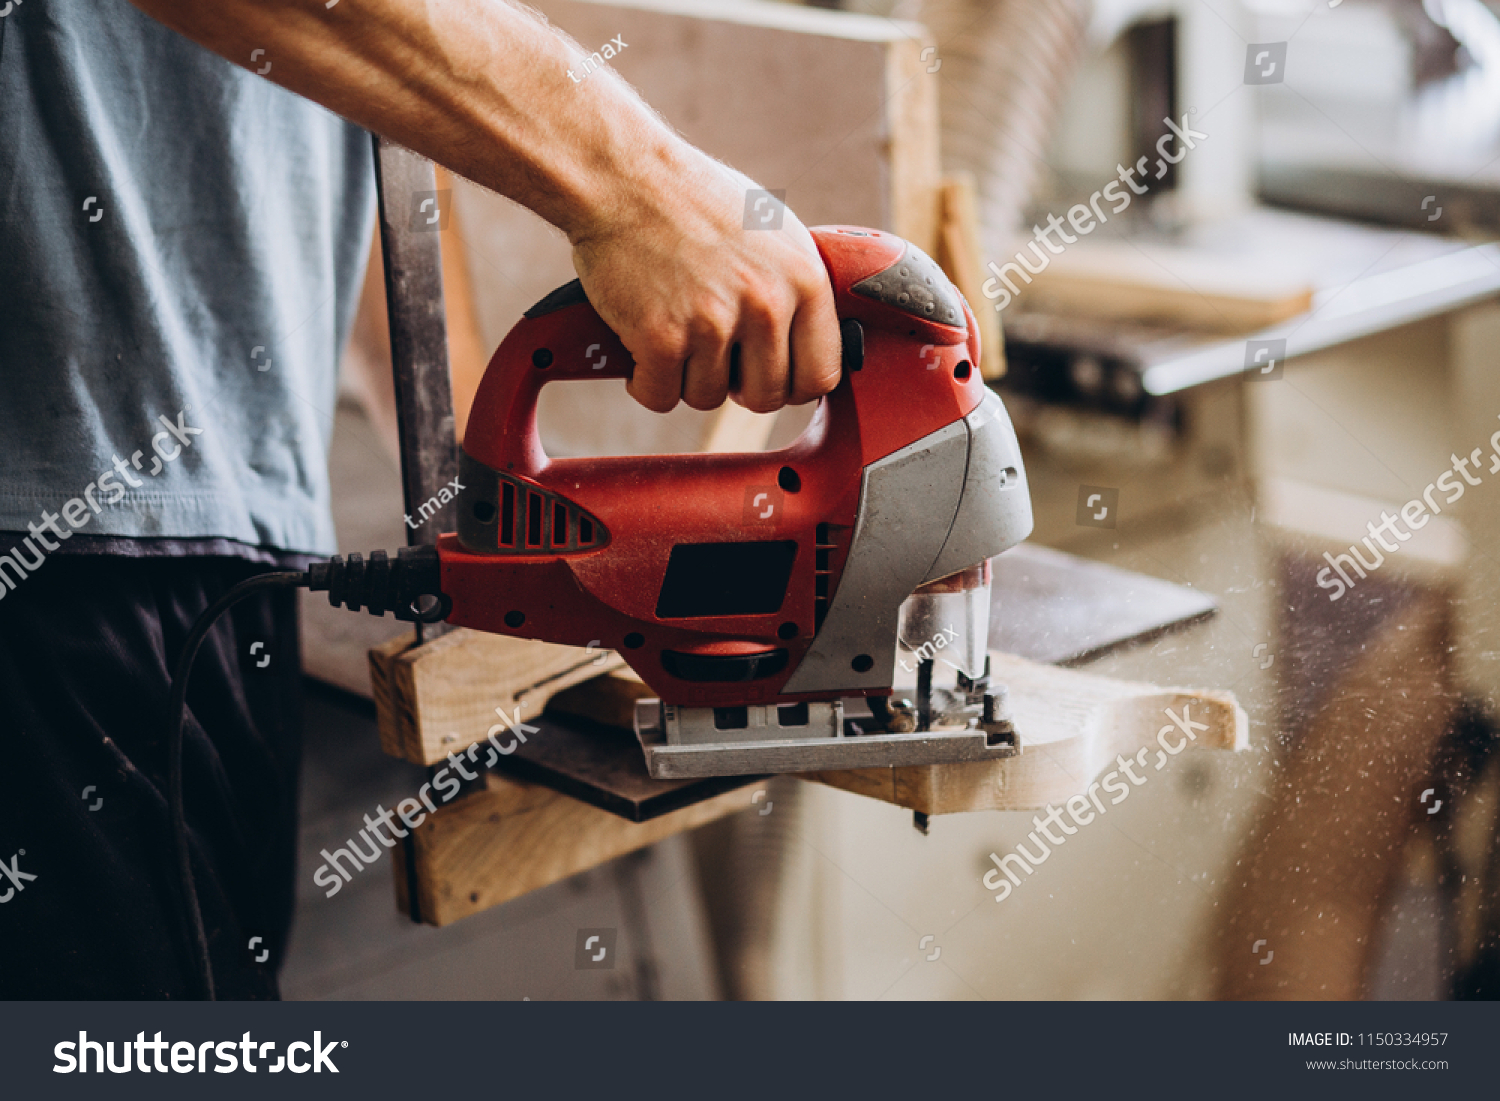 The carpenter, joiner, woodworker cutting the tree with an electric jig saw #1150334957